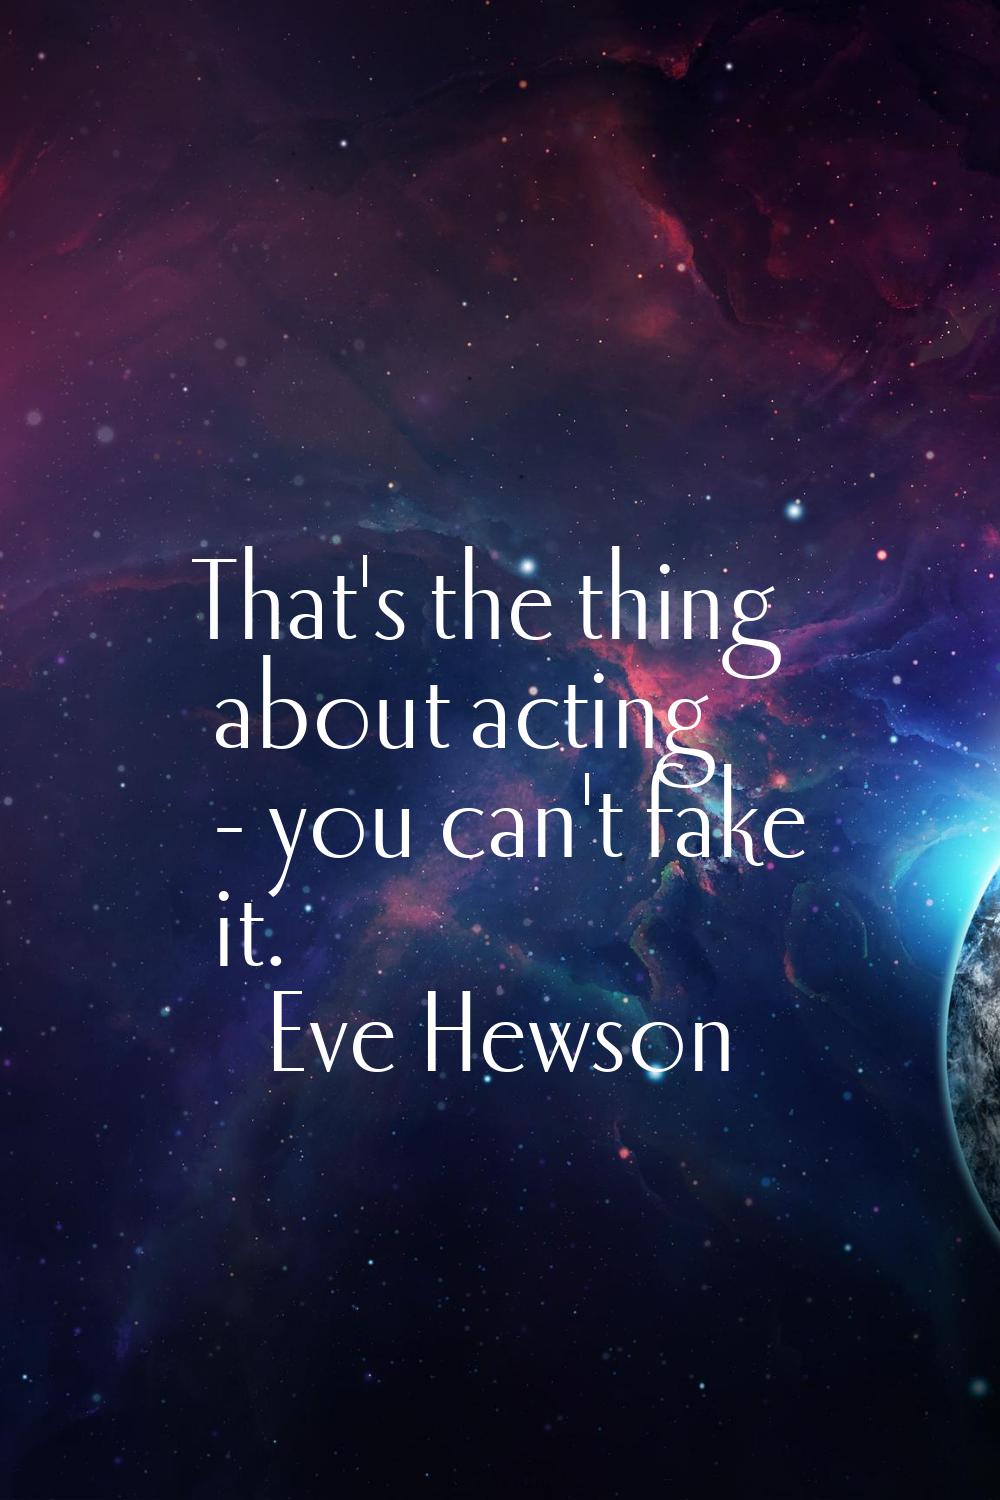 That's the thing about acting - you can't fake it.